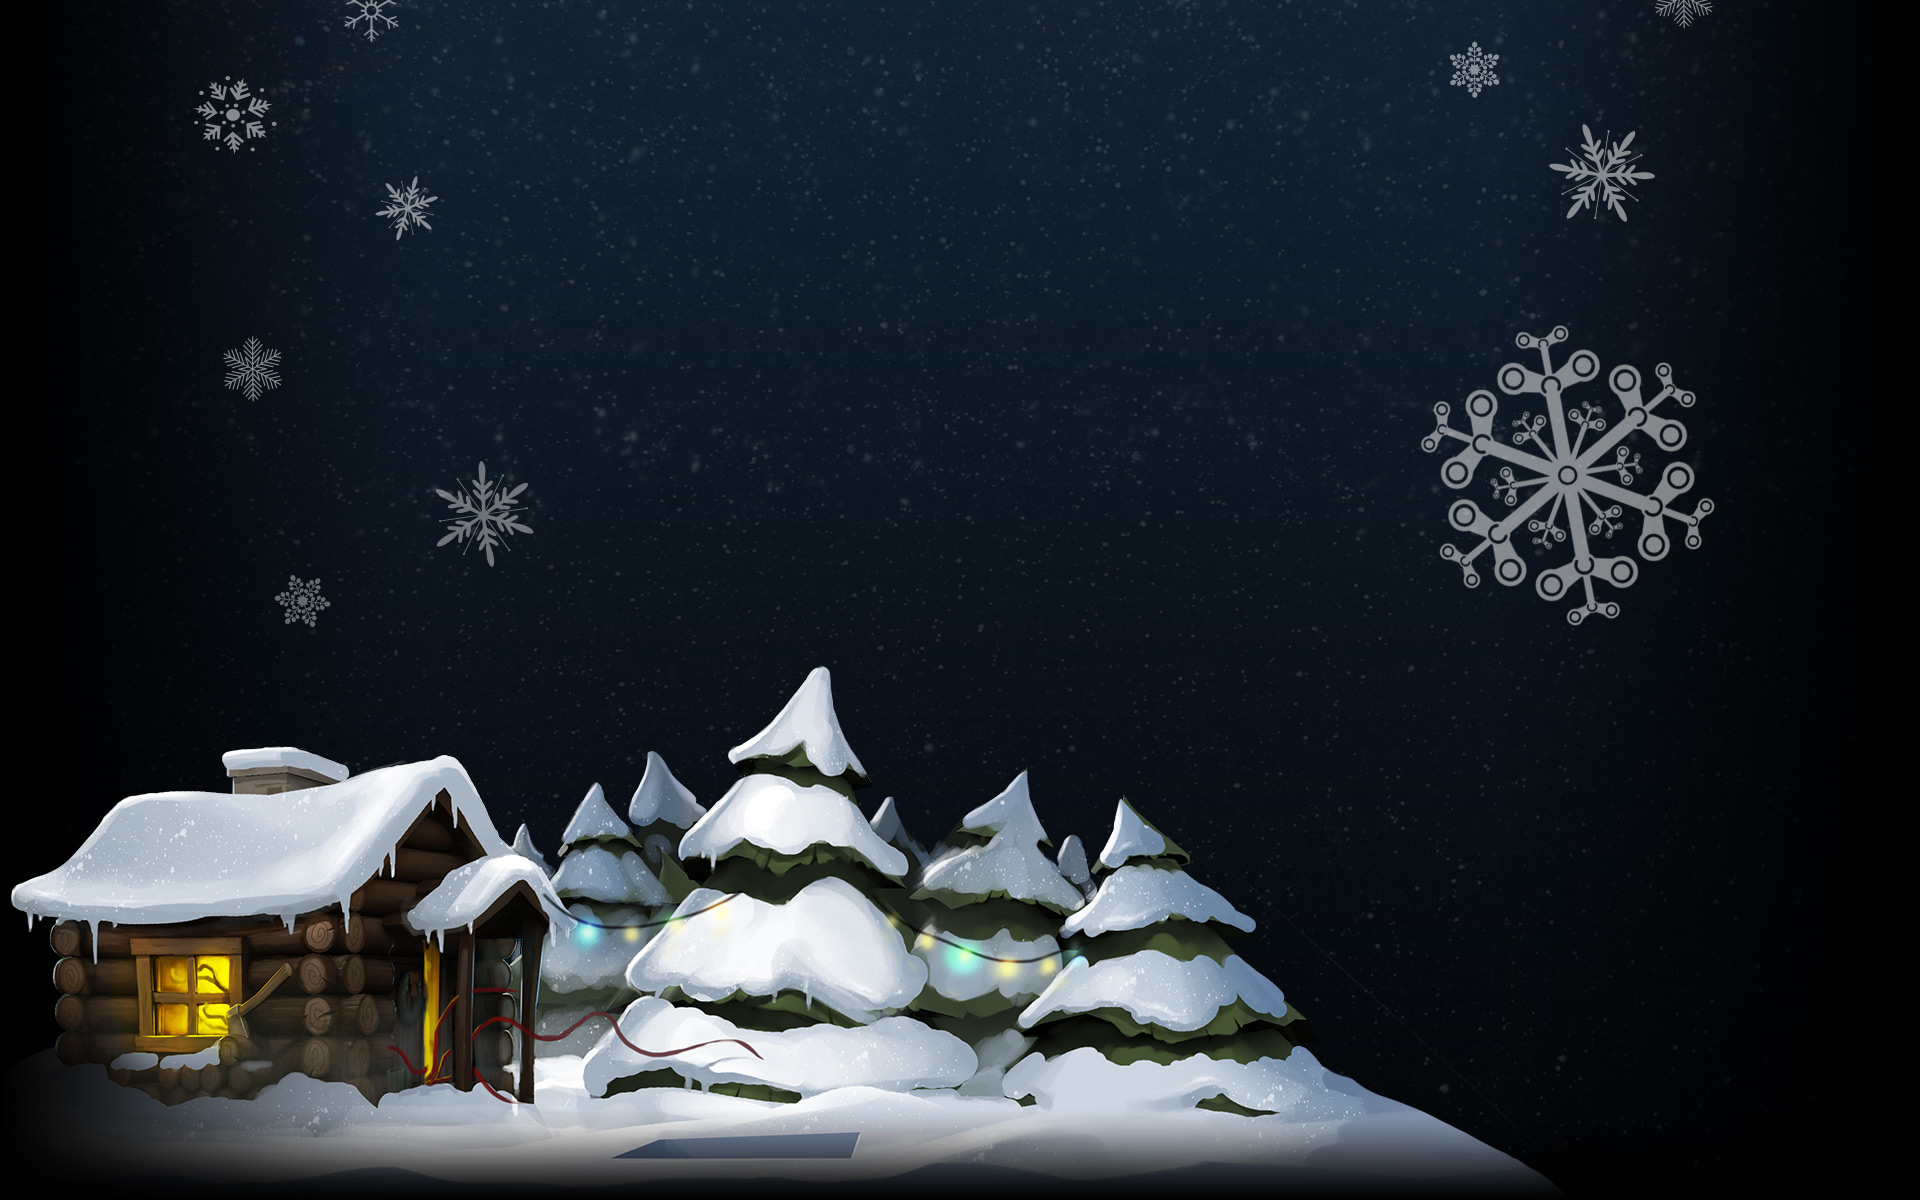 We need Christmas theme animated background : r/Steam